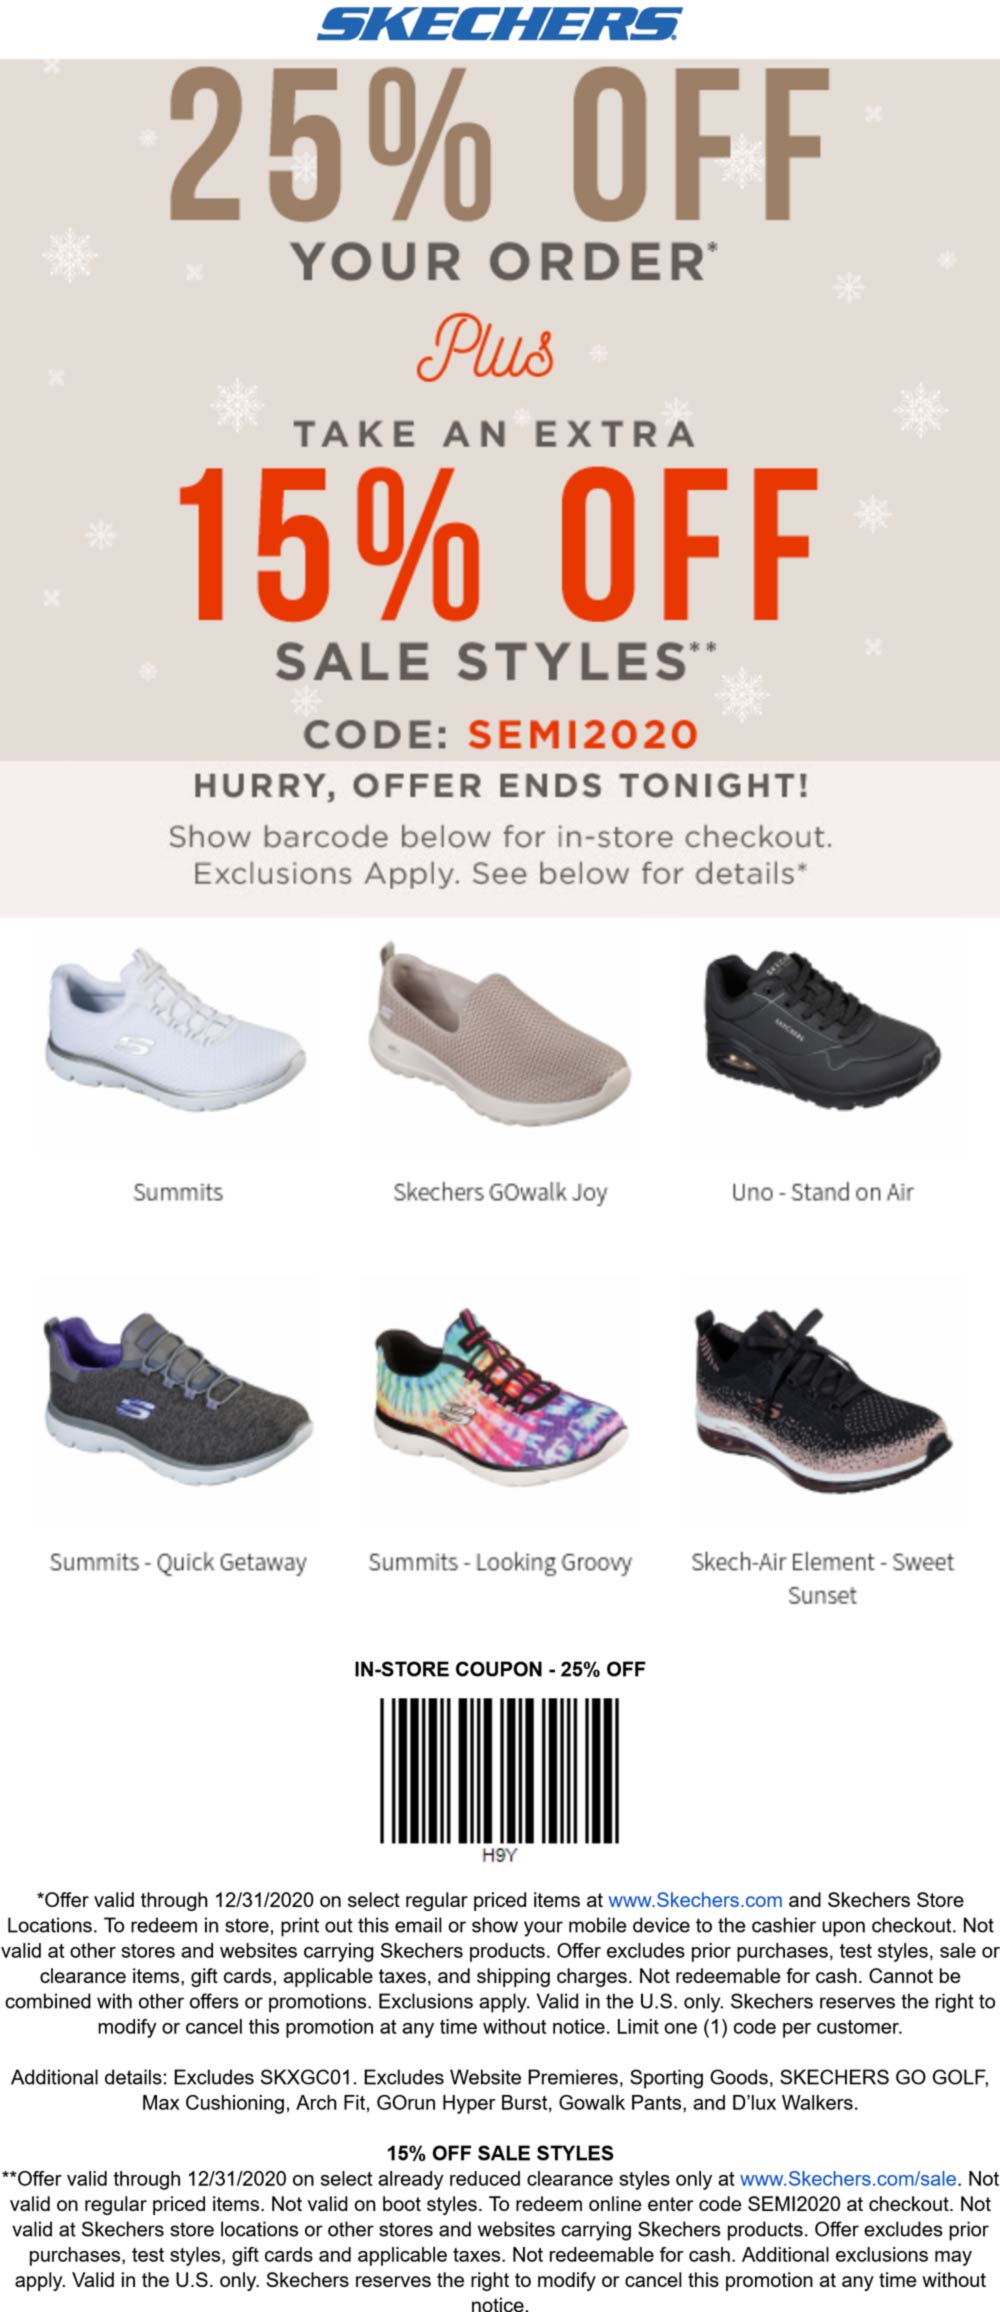 2540 off shoes today at Skechers via promo code SEMI2020 skechers